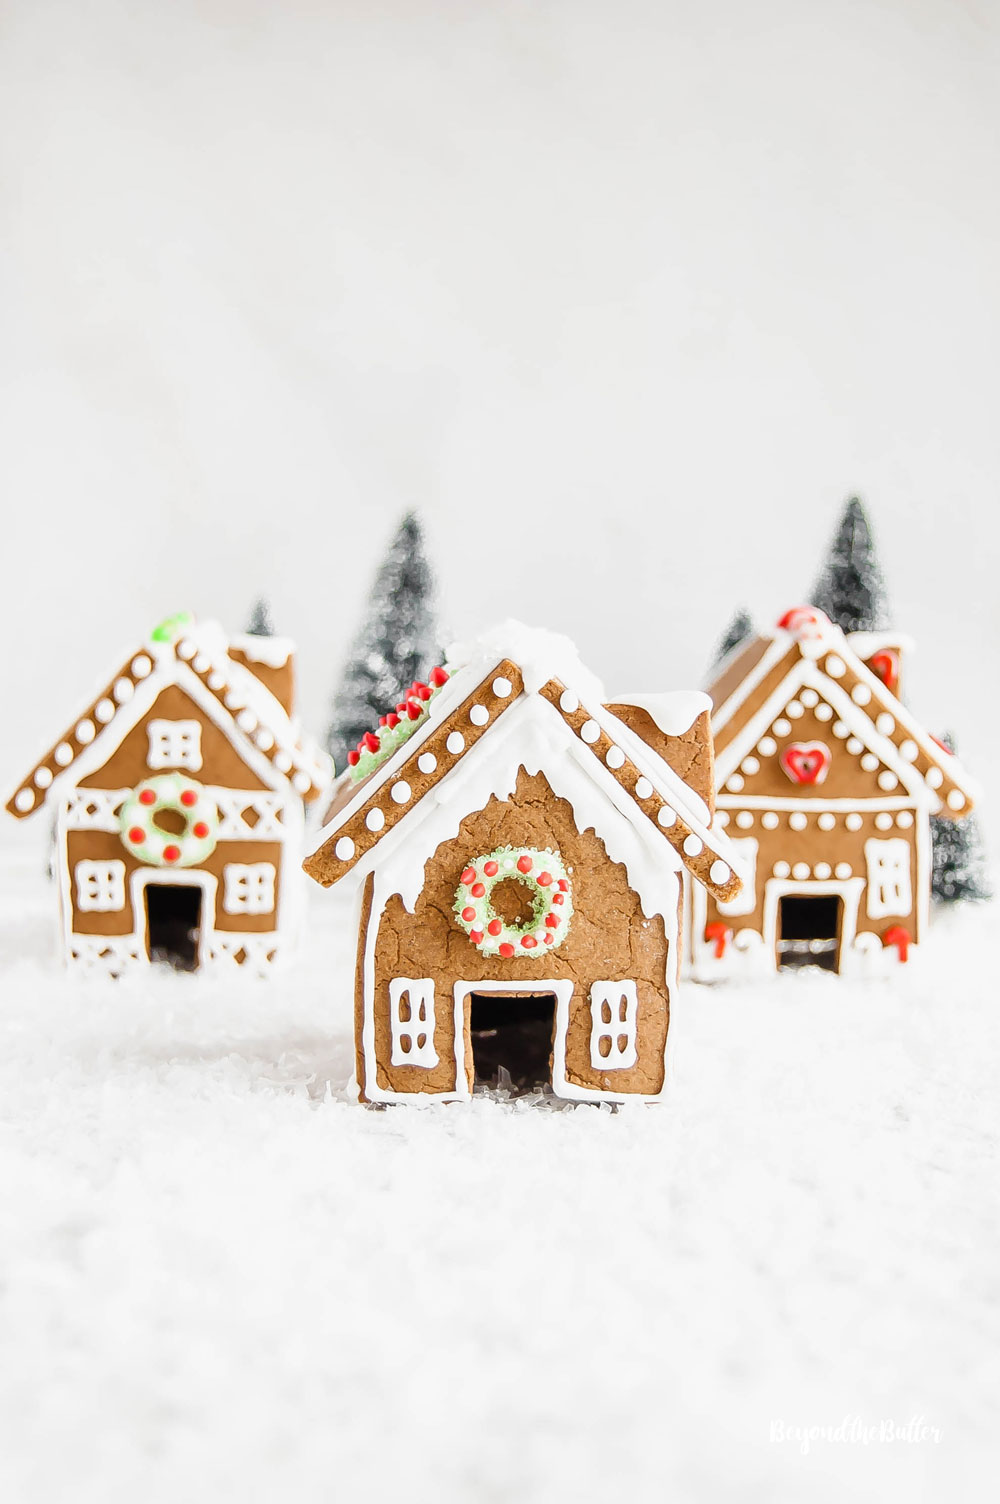 Homemade Gingerbread Houses - 3 gingerbread houses with trees in the background | All Images © Beyond the Butter, LLC